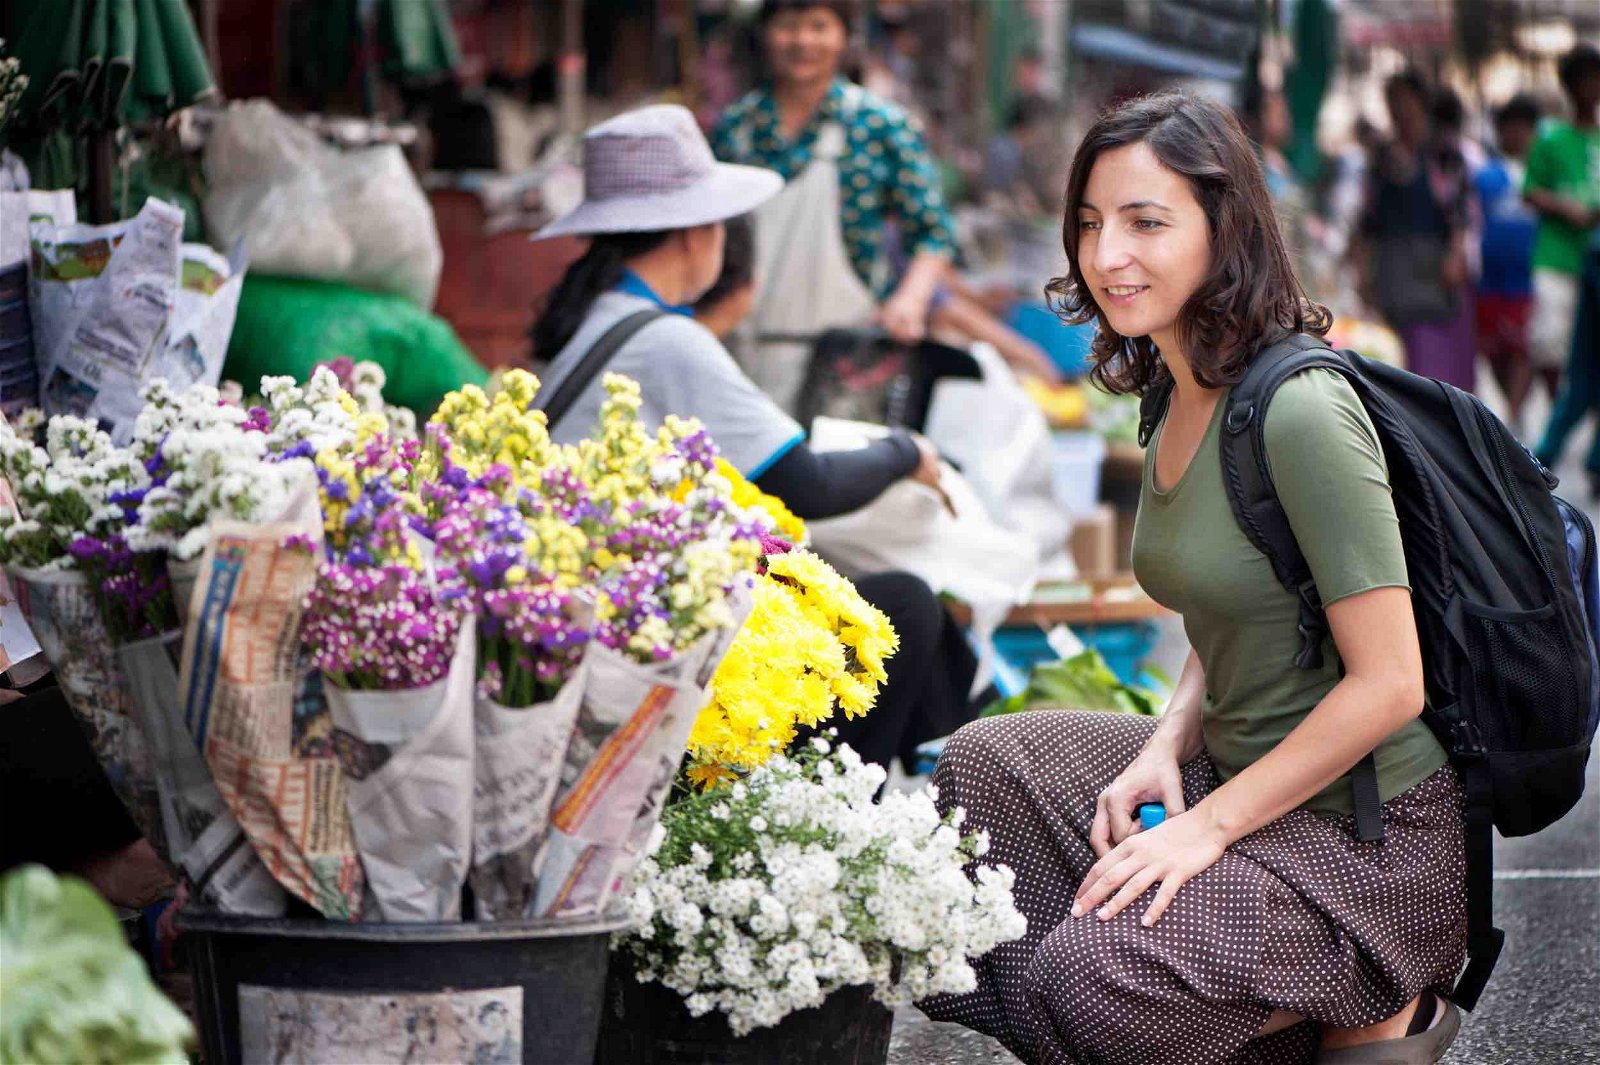 Young woman buying flowers at a street market.